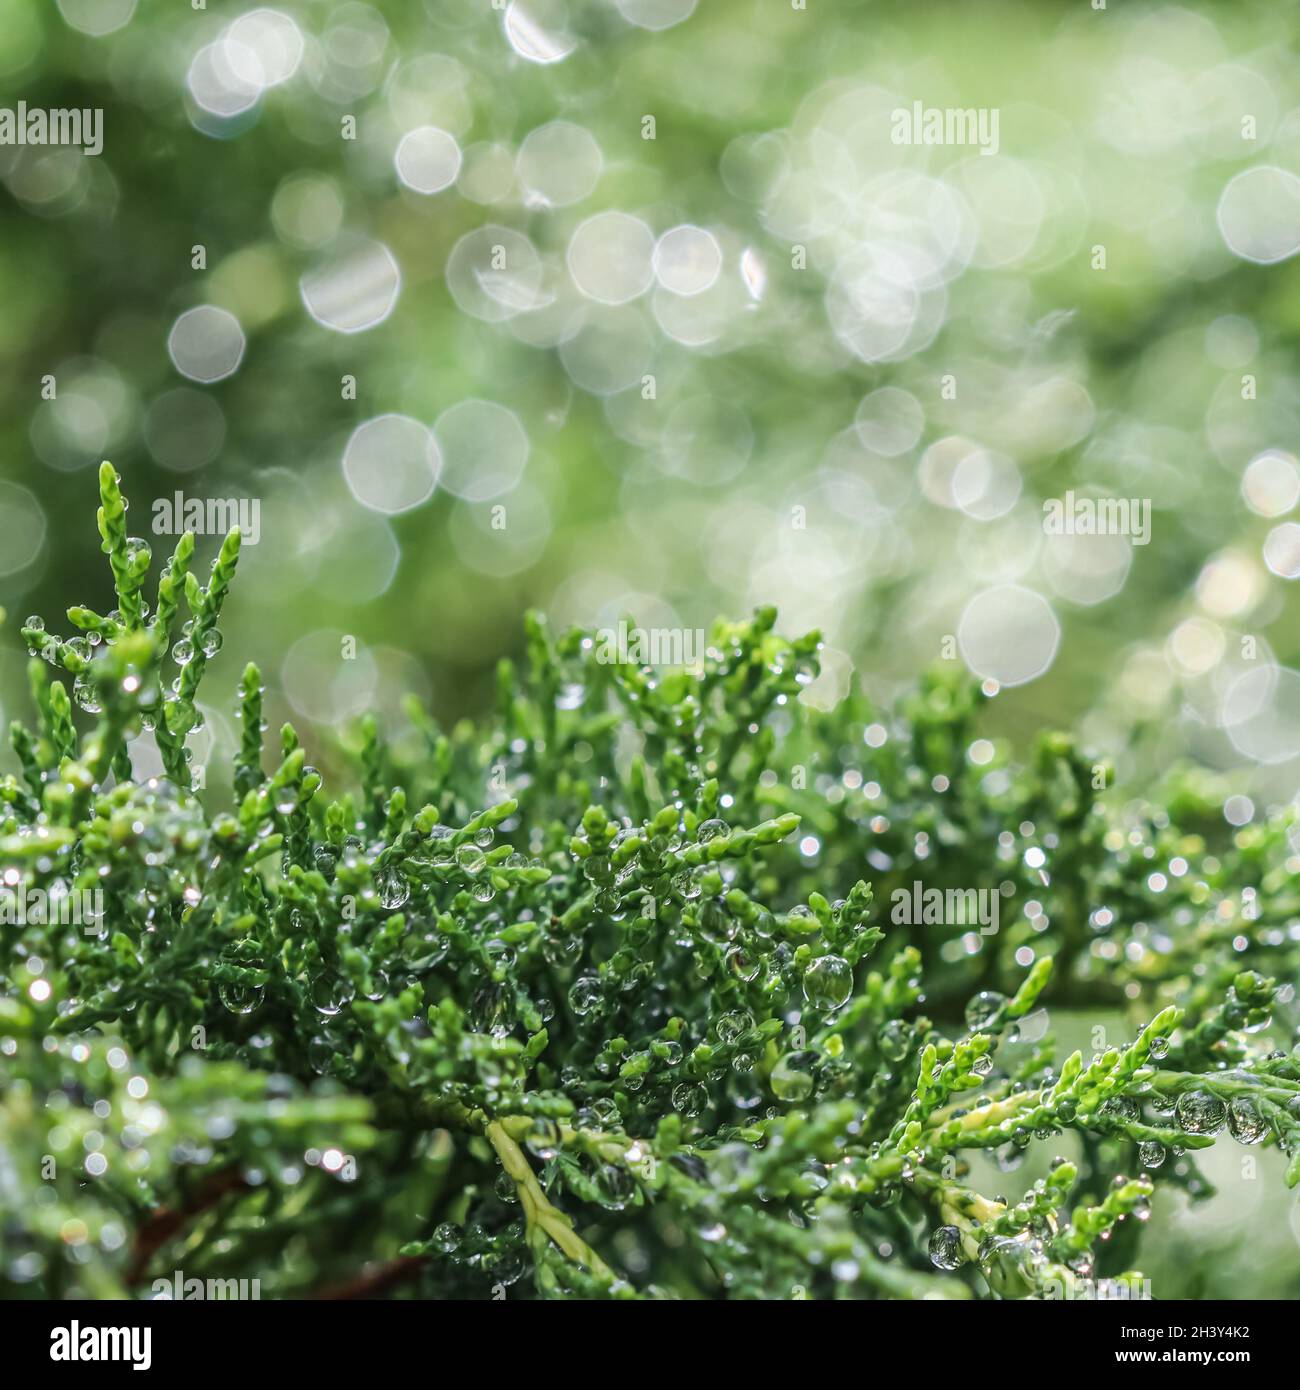 Texture, background, pattern of green branches of evergreen juniper with rain drops. Bokeh with light reflection Stock Photo